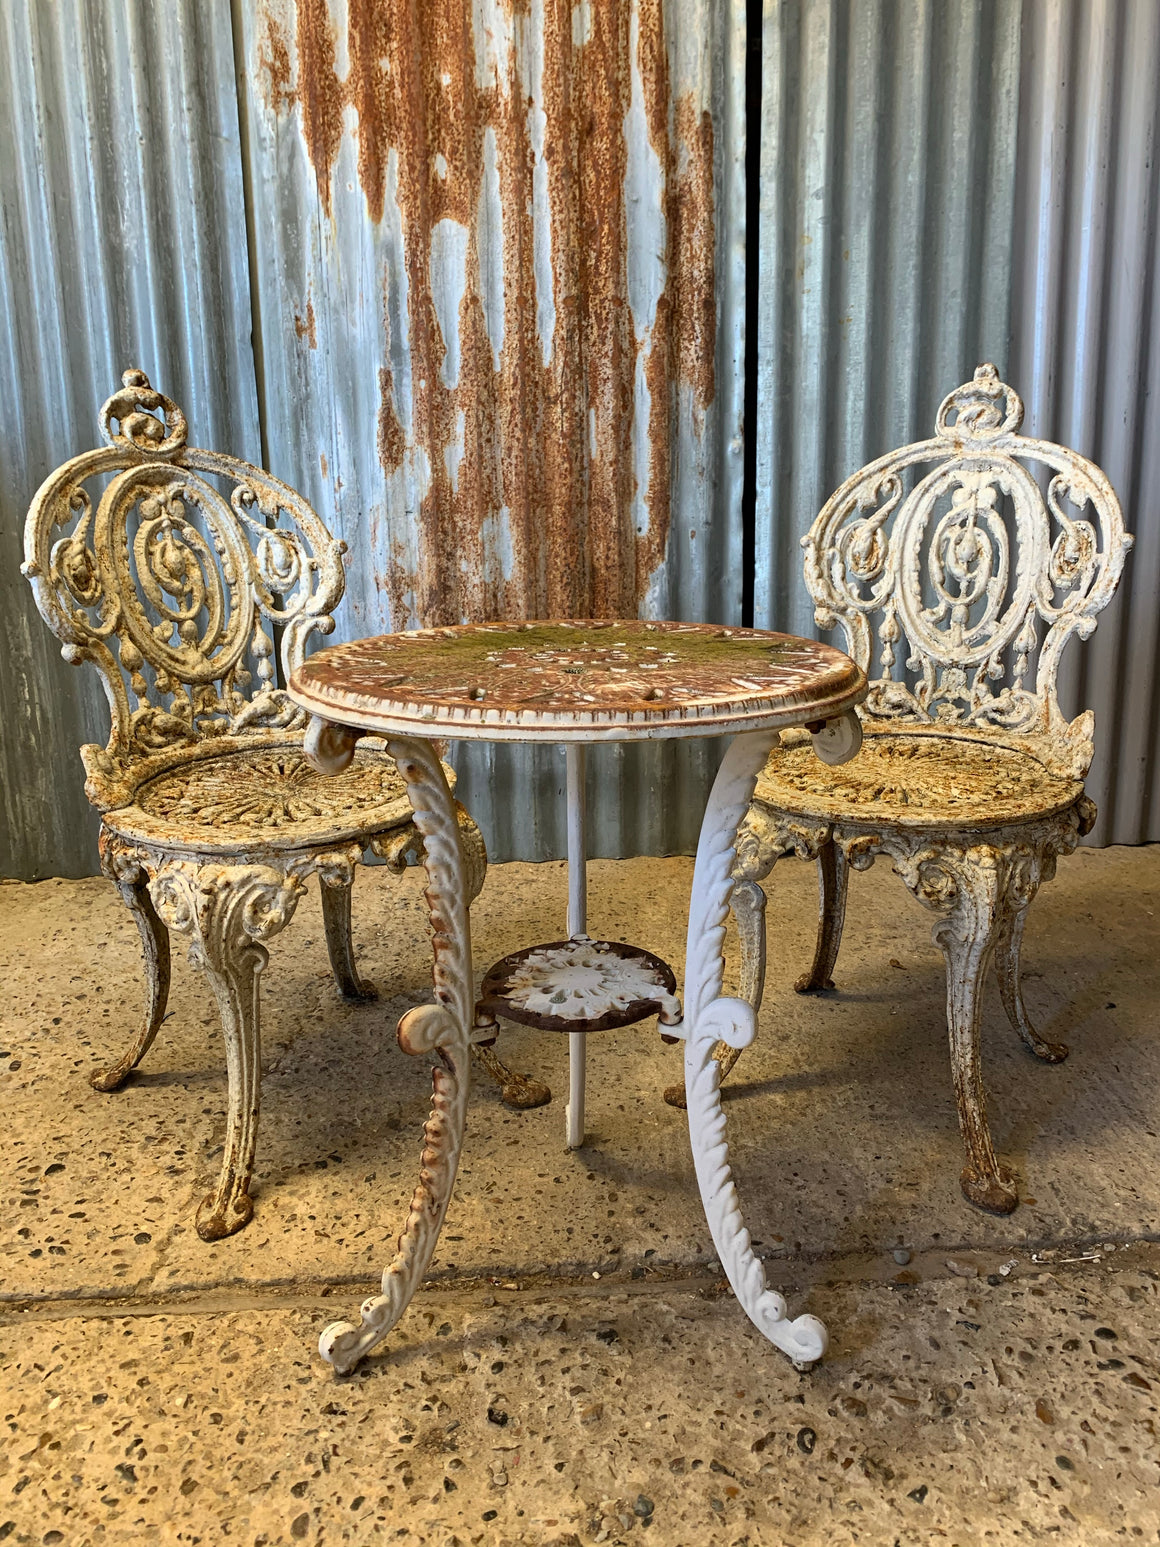 A pair of white cast iron Coalbrookdale chairs and complimentary bistro table